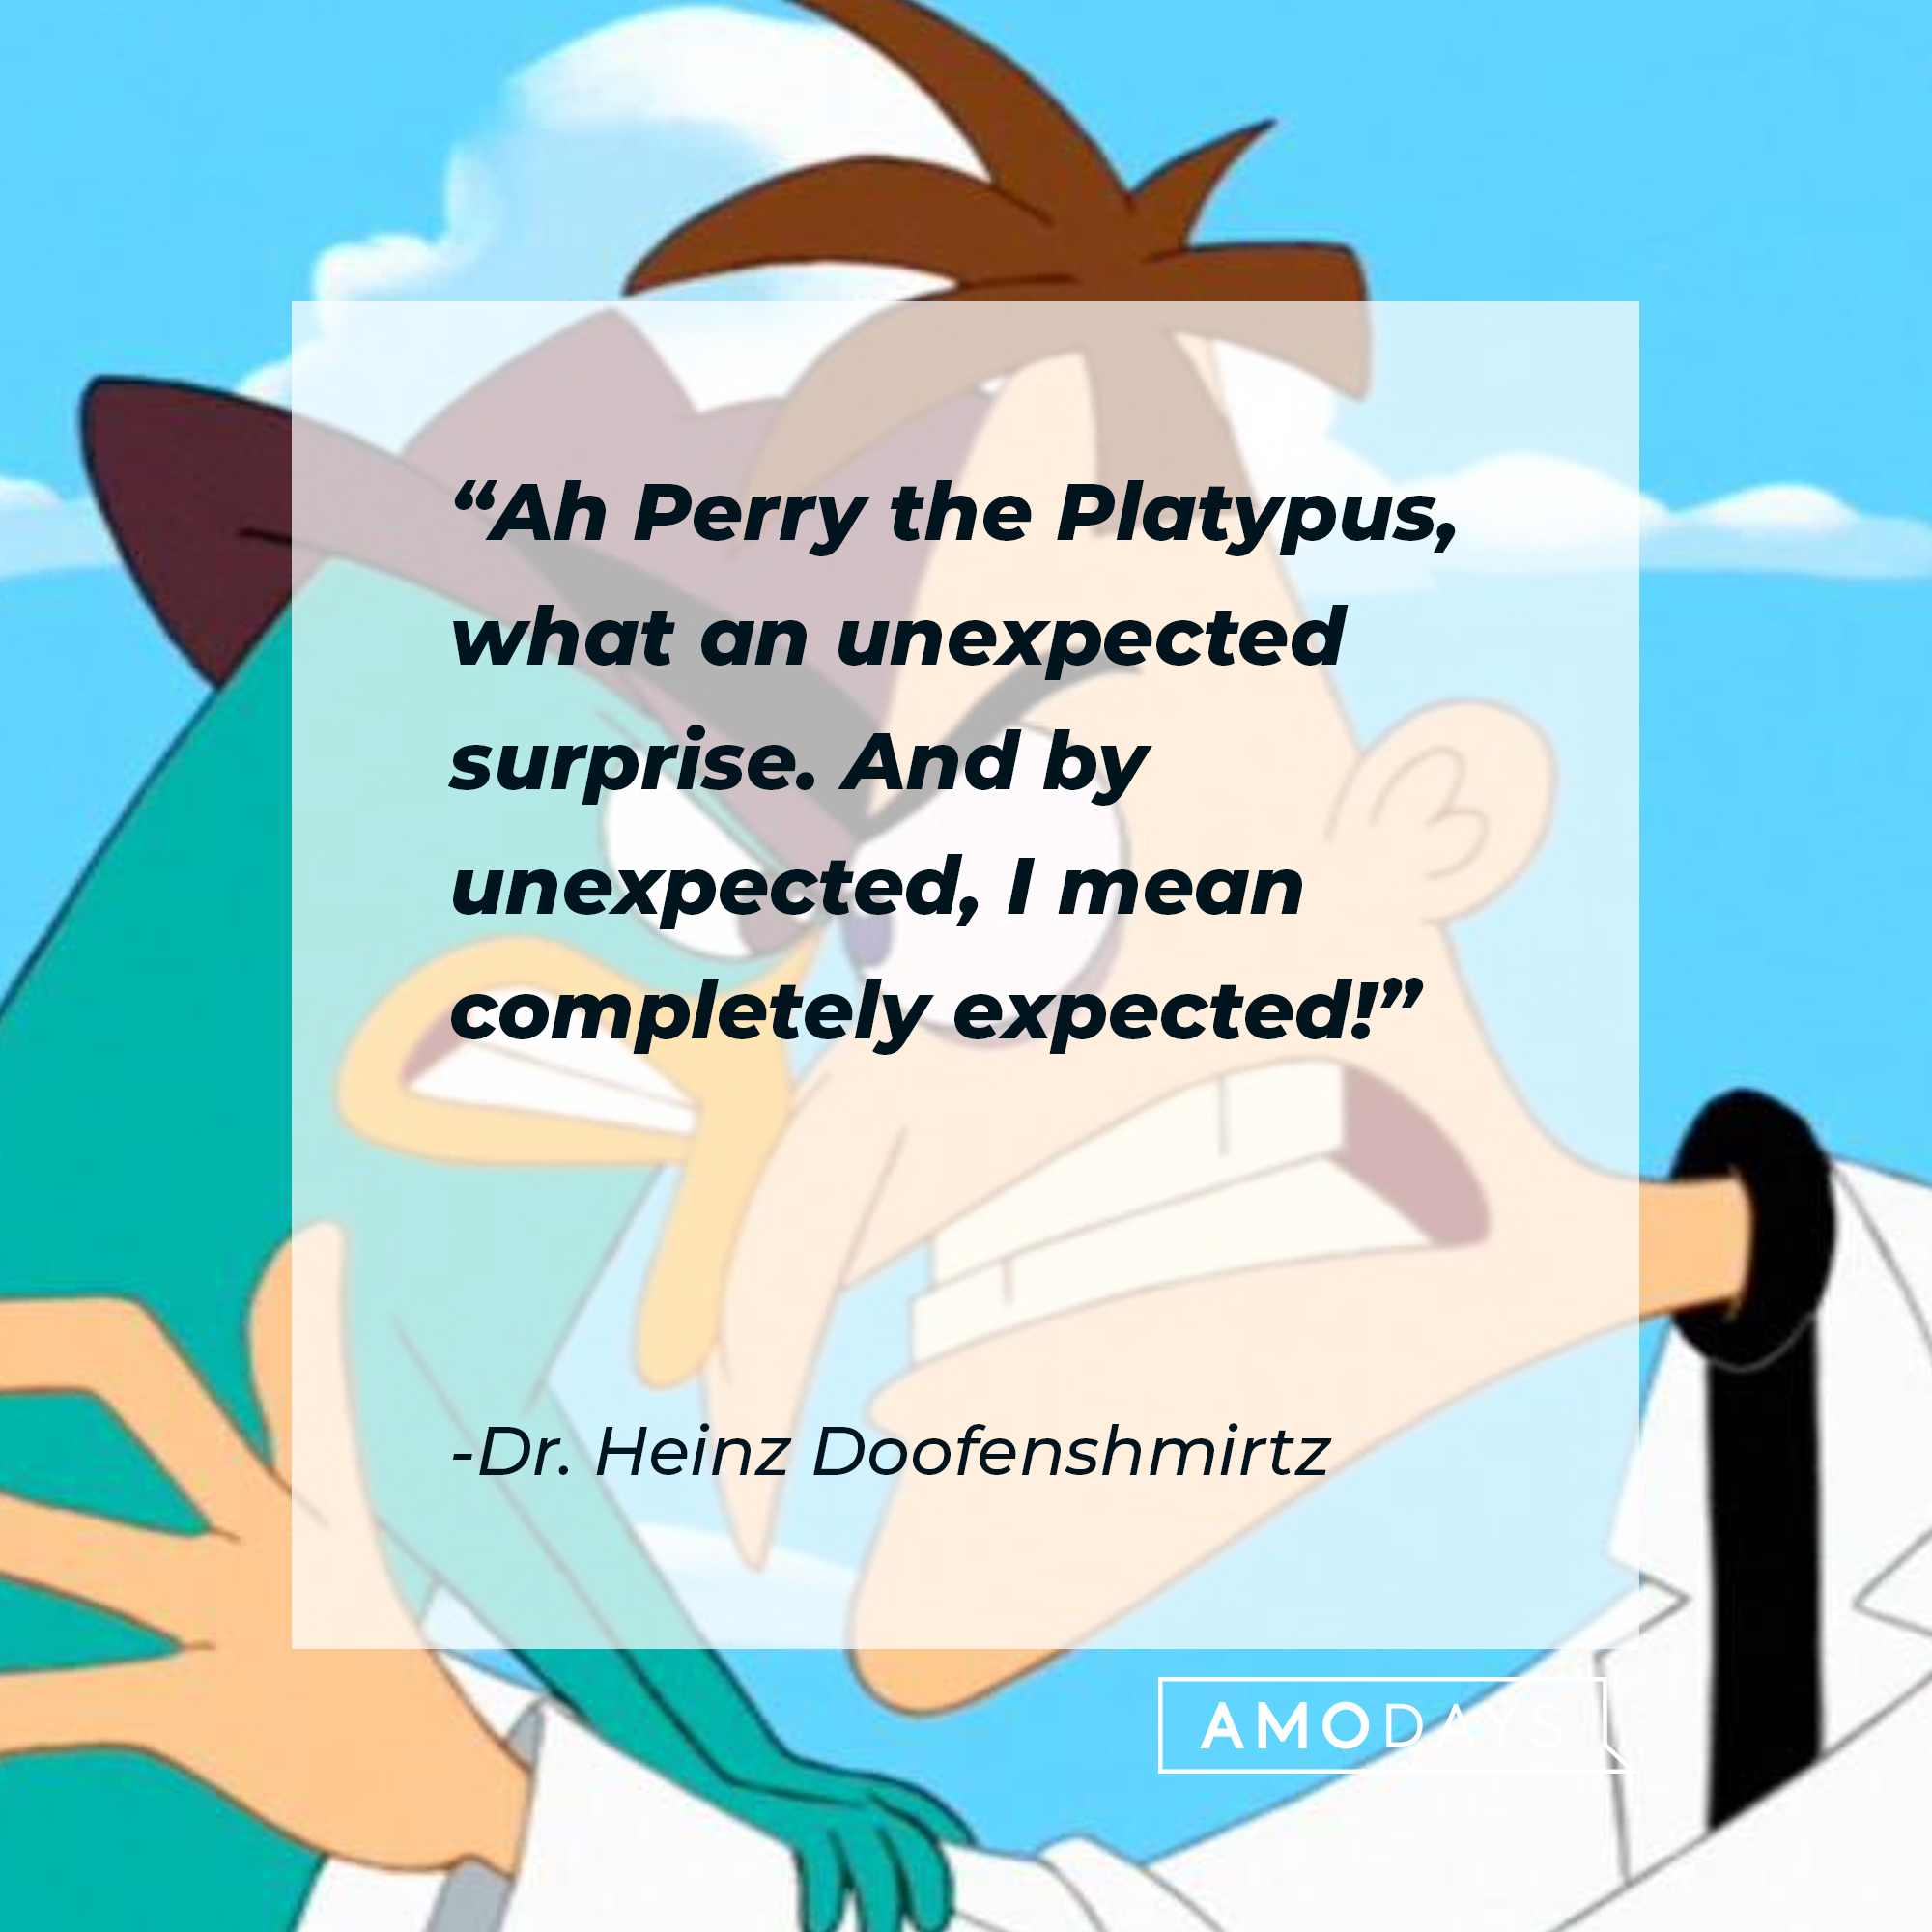 Dr. Heinz Doofenshmirtz's quote: "Ah Perry the Platypus, what an unexpected surprise. And by unexpected, I mean completely expected!" | Source: facebook.com/Phineas-and-Ferb